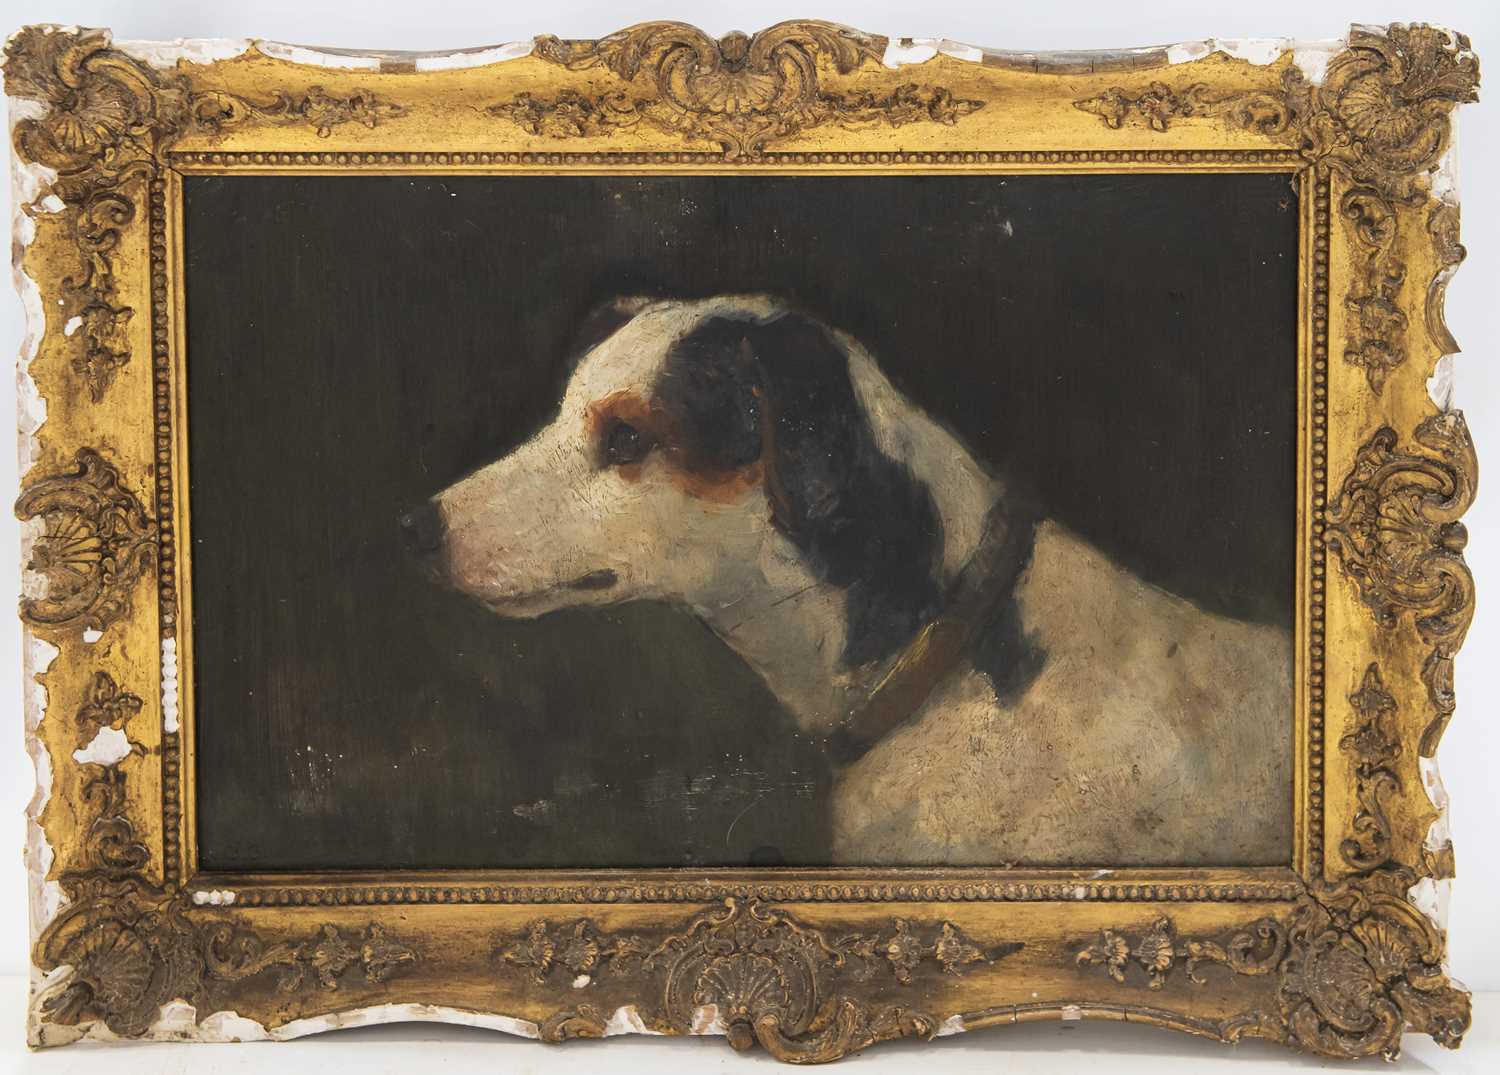 19TH/ 20TH CENTURY ENGLISH SCHOOL PORTRAIT OF A JACK RUSSELL - Image 2 of 2